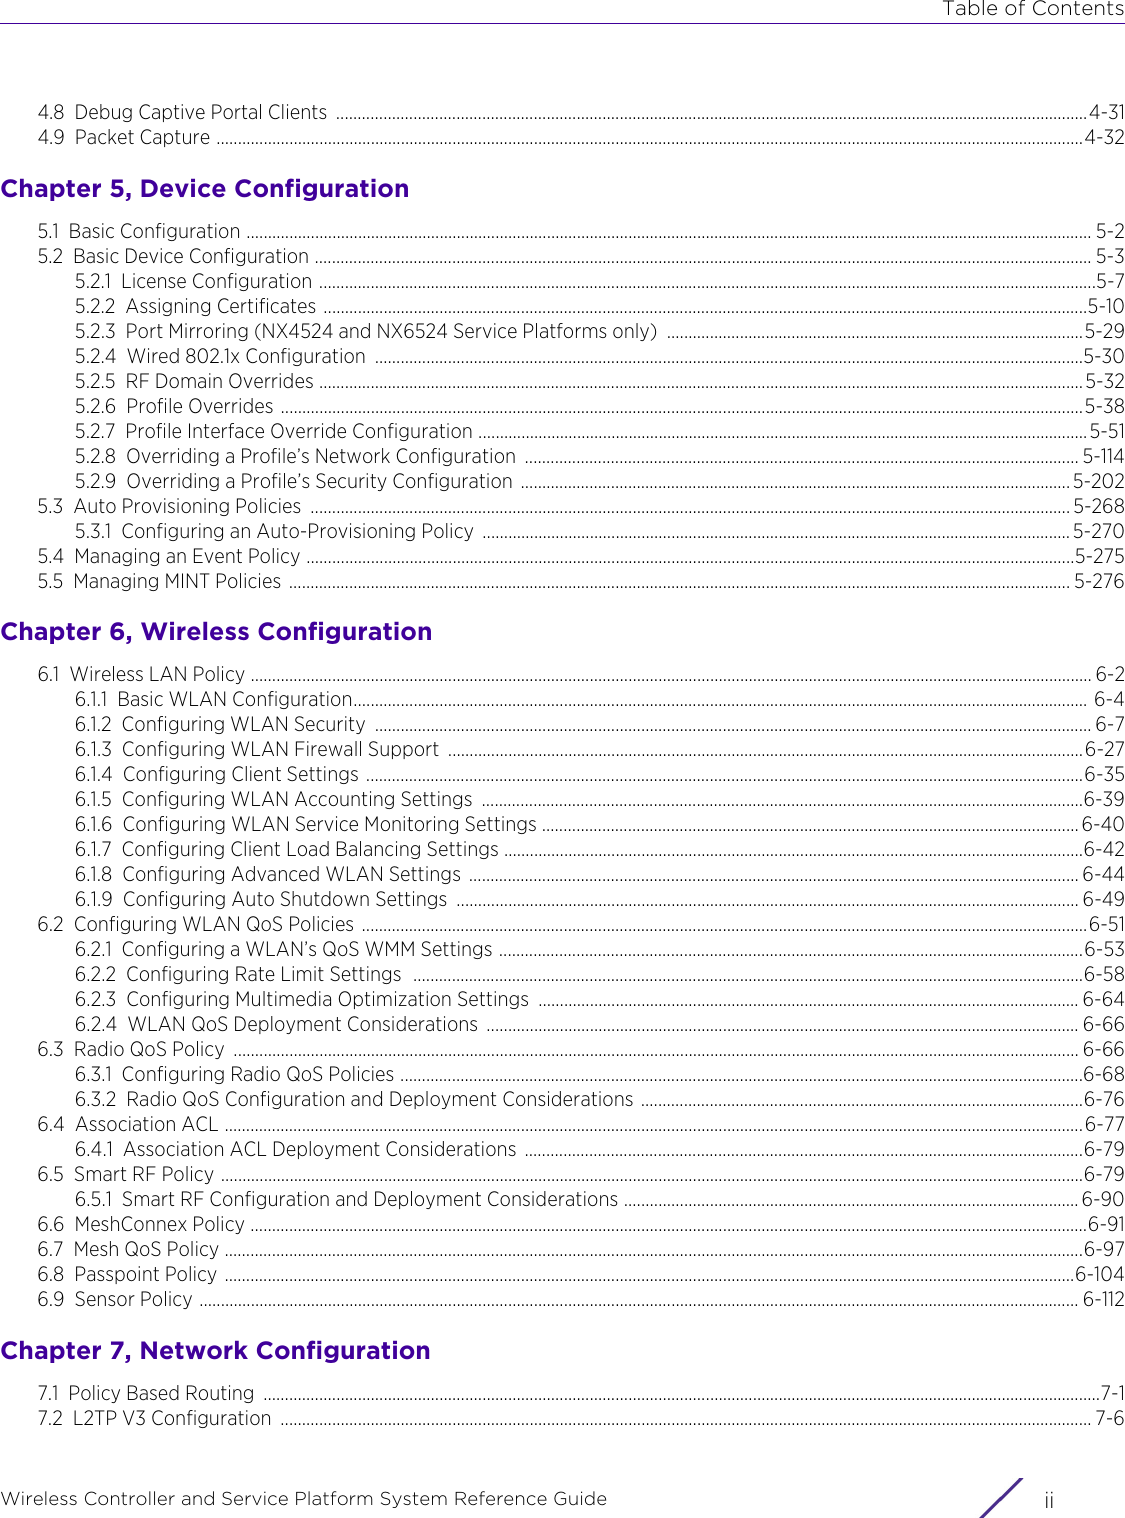 Table of ContentsWireless Controller and Service Platform System Reference Guide  ii4.8 Debug Captive Portal Clients  ...............................................................................................................................................................................4-314.9 Packet Capture ..........................................................................................................................................................................................................4-32Chapter 5, Device Configuration5.1 Basic Configuration ..................................................................................................................................................................................................... 5-25.2 Basic Device Configuration ..................................................................................................................................................................................... 5-35.2.1 License Configuration .....................................................................................................................................................................................5-75.2.2 Assigning Certificates ..................................................................................................................................................................................5-105.2.3 Port Mirroring (NX4524 and NX6524 Service Platforms only)  .................................................................................................5-295.2.4 Wired 802.1x Configuration  .....................................................................................................................................................................5-305.2.5 RF Domain Overrides ..................................................................................................................................................................................5-325.2.6 Profile Overrides ...........................................................................................................................................................................................5-385.2.7 Profile Interface Override Configuration ..............................................................................................................................................5-515.2.8 Overriding a Profile’s Network Configuration  ................................................................................................................................. 5-1145.2.9 Overriding a Profile’s Security Configuration  ................................................................................................................................ 5-2025.3 Auto Provisioning Policies  ................................................................................................................................................................................. 5-2685.3.1 Configuring an Auto-Provisioning Policy  ......................................................................................................................................... 5-2705.4 Managing an Event Policy ...................................................................................................................................................................................5-2755.5 Managing MINT Policies  ...................................................................................................................................................................................... 5-276Chapter 6, Wireless Configuration6.1 Wireless LAN Policy .................................................................................................................................................................................................... 6-26.1.1 Basic WLAN Configuration........................................................................................................................................................................... 6-46.1.2 Configuring WLAN Security  ....................................................................................................................................................................... 6-76.1.3 Configuring WLAN Firewall Support  ....................................................................................................................................................6-276.1.4 Configuring Client Settings .......................................................................................................................................................................6-356.1.5 Configuring WLAN Accounting Settings  ............................................................................................................................................6-396.1.6 Configuring WLAN Service Monitoring Settings ............................................................................................................................. 6-406.1.7 Configuring Client Load Balancing Settings .......................................................................................................................................6-426.1.8 Configuring Advanced WLAN Settings  .............................................................................................................................................. 6-446.1.9 Configuring Auto Shutdown Settings  ................................................................................................................................................. 6-496.2 Configuring WLAN QoS Policies  .........................................................................................................................................................................6-516.2.1 Configuring a WLAN’s QoS WMM Settings ........................................................................................................................................6-536.2.2 Configuring Rate Limit Settings  ............................................................................................................................................................6-586.2.3 Configuring Multimedia Optimization Settings  .............................................................................................................................. 6-646.2.4 WLAN QoS Deployment Considerations  .......................................................................................................................................... 6-666.3 Radio QoS Policy  ..................................................................................................................................................................................................... 6-666.3.1 Configuring Radio QoS Policies ...............................................................................................................................................................6-686.3.2 Radio QoS Configuration and Deployment Considerations .......................................................................................................6-766.4 Association ACL ........................................................................................................................................................................................................6-776.4.1 Association ACL Deployment Considerations  ..................................................................................................................................6-796.5 Smart RF Policy .........................................................................................................................................................................................................6-796.5.1 Smart RF Configuration and Deployment Considerations .......................................................................................................... 6-906.6 MeshConnex Policy ...................................................................................................................................................................................................6-916.7 Mesh QoS Policy ........................................................................................................................................................................................................6-976.8 Passpoint Policy ......................................................................................................................................................................................................6-1046.9 Sensor Policy ............................................................................................................................................................................................................. 6-112Chapter 7, Network Configuration7.1 Policy Based Routing  ...................................................................................................................................................................................................7-17.2 L2TP V3 Configuration  ............................................................................................................................................................................................. 7-6